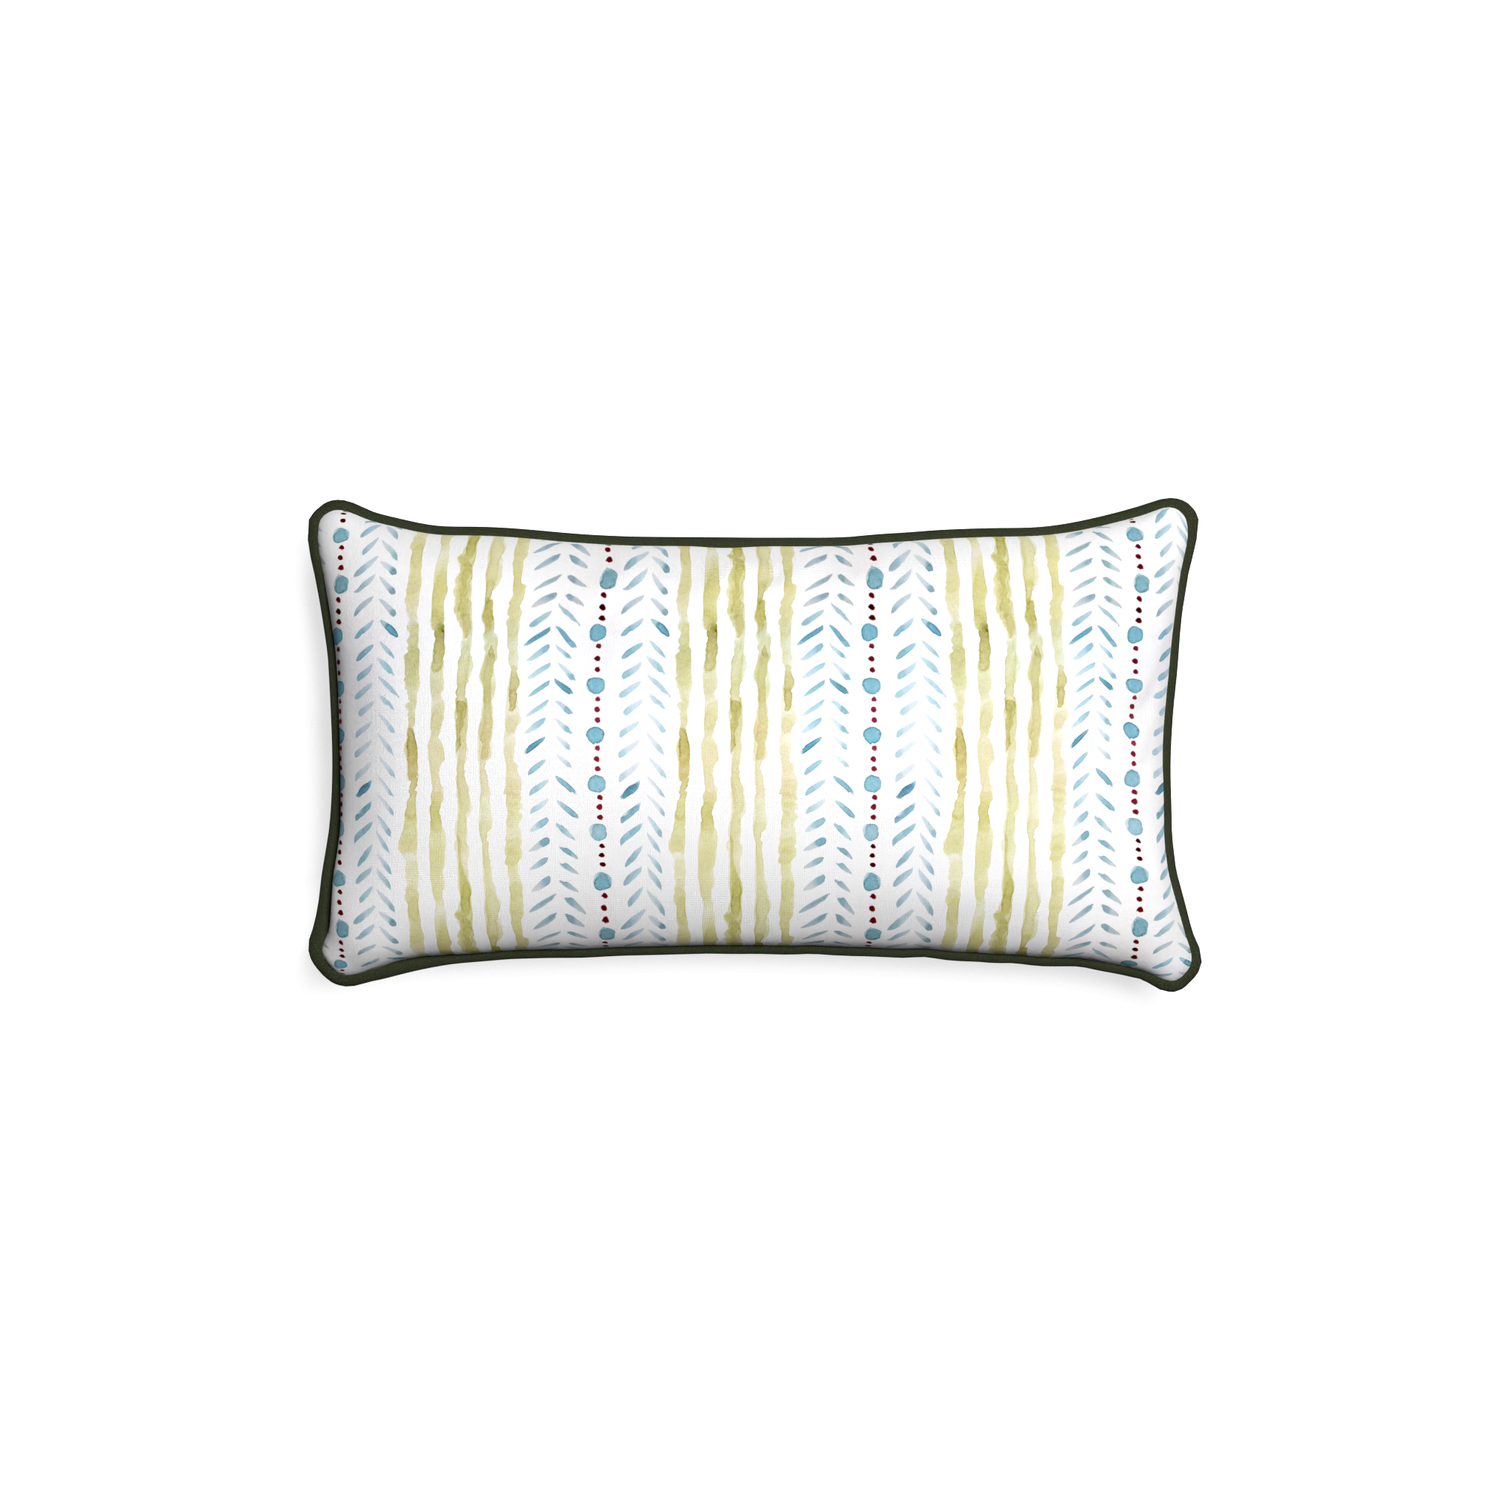 Petite-lumbar julia custom blue & green stripedpillow with f piping on white background